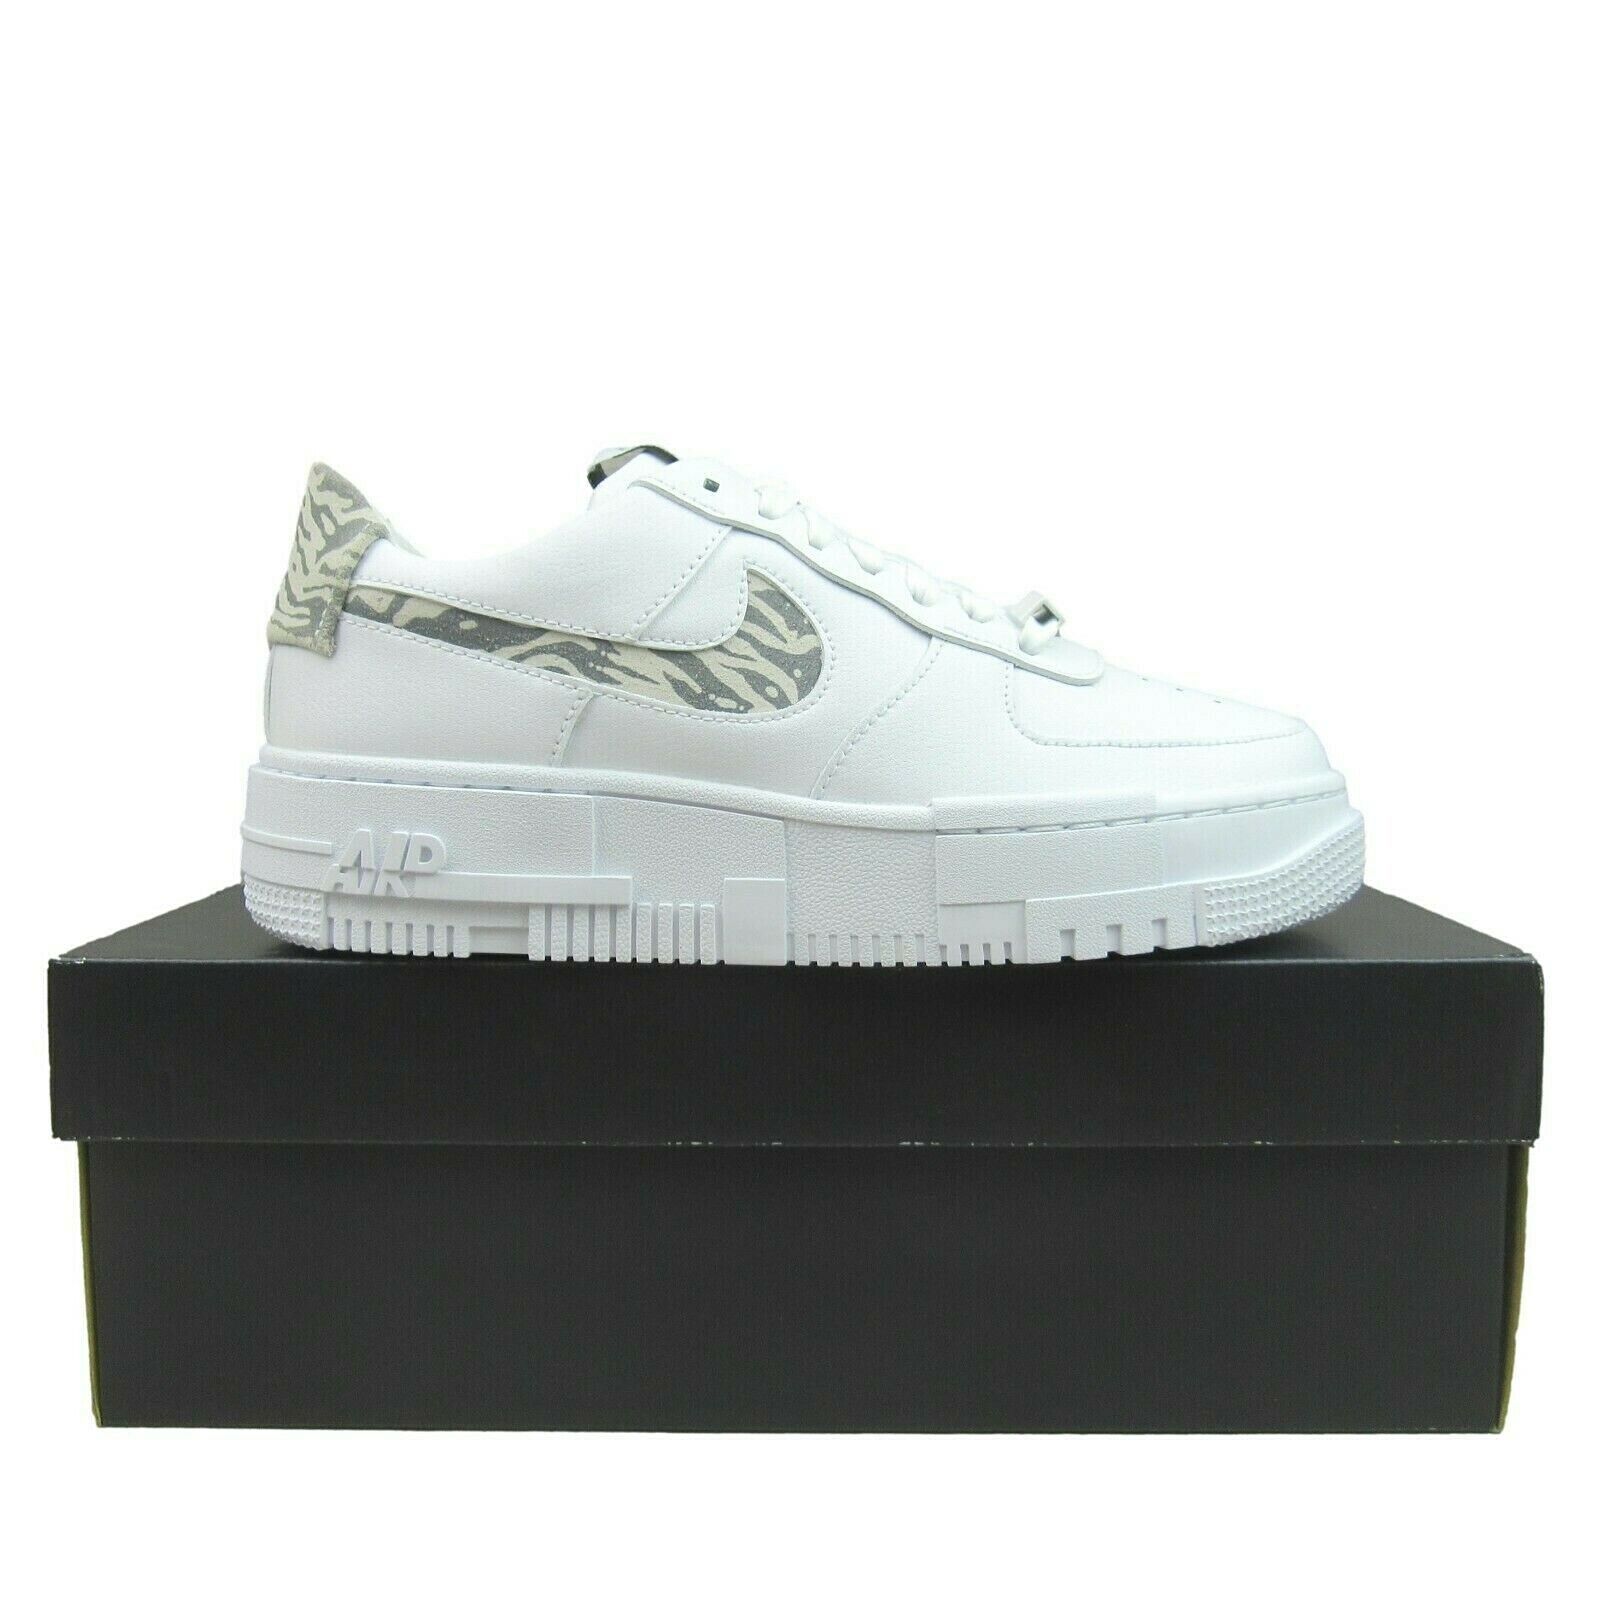 Primary image for Nike Air Force 1 Low Pixel SE Women's Size 9.5 White Zebra Shoes NEW DH9632-100